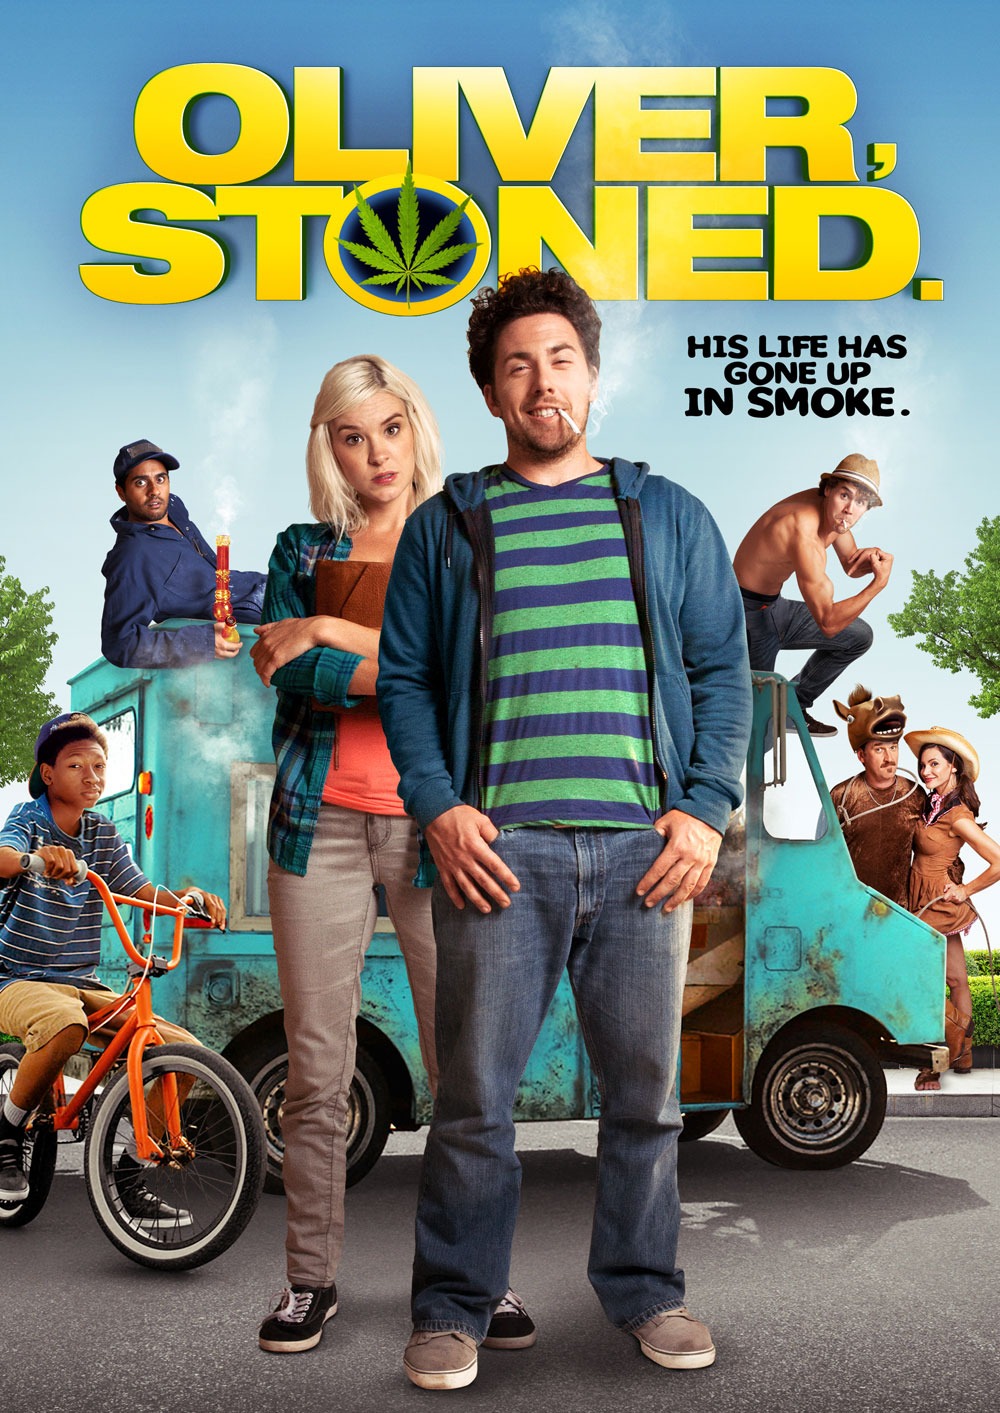 Oliver Stoned DVD cover